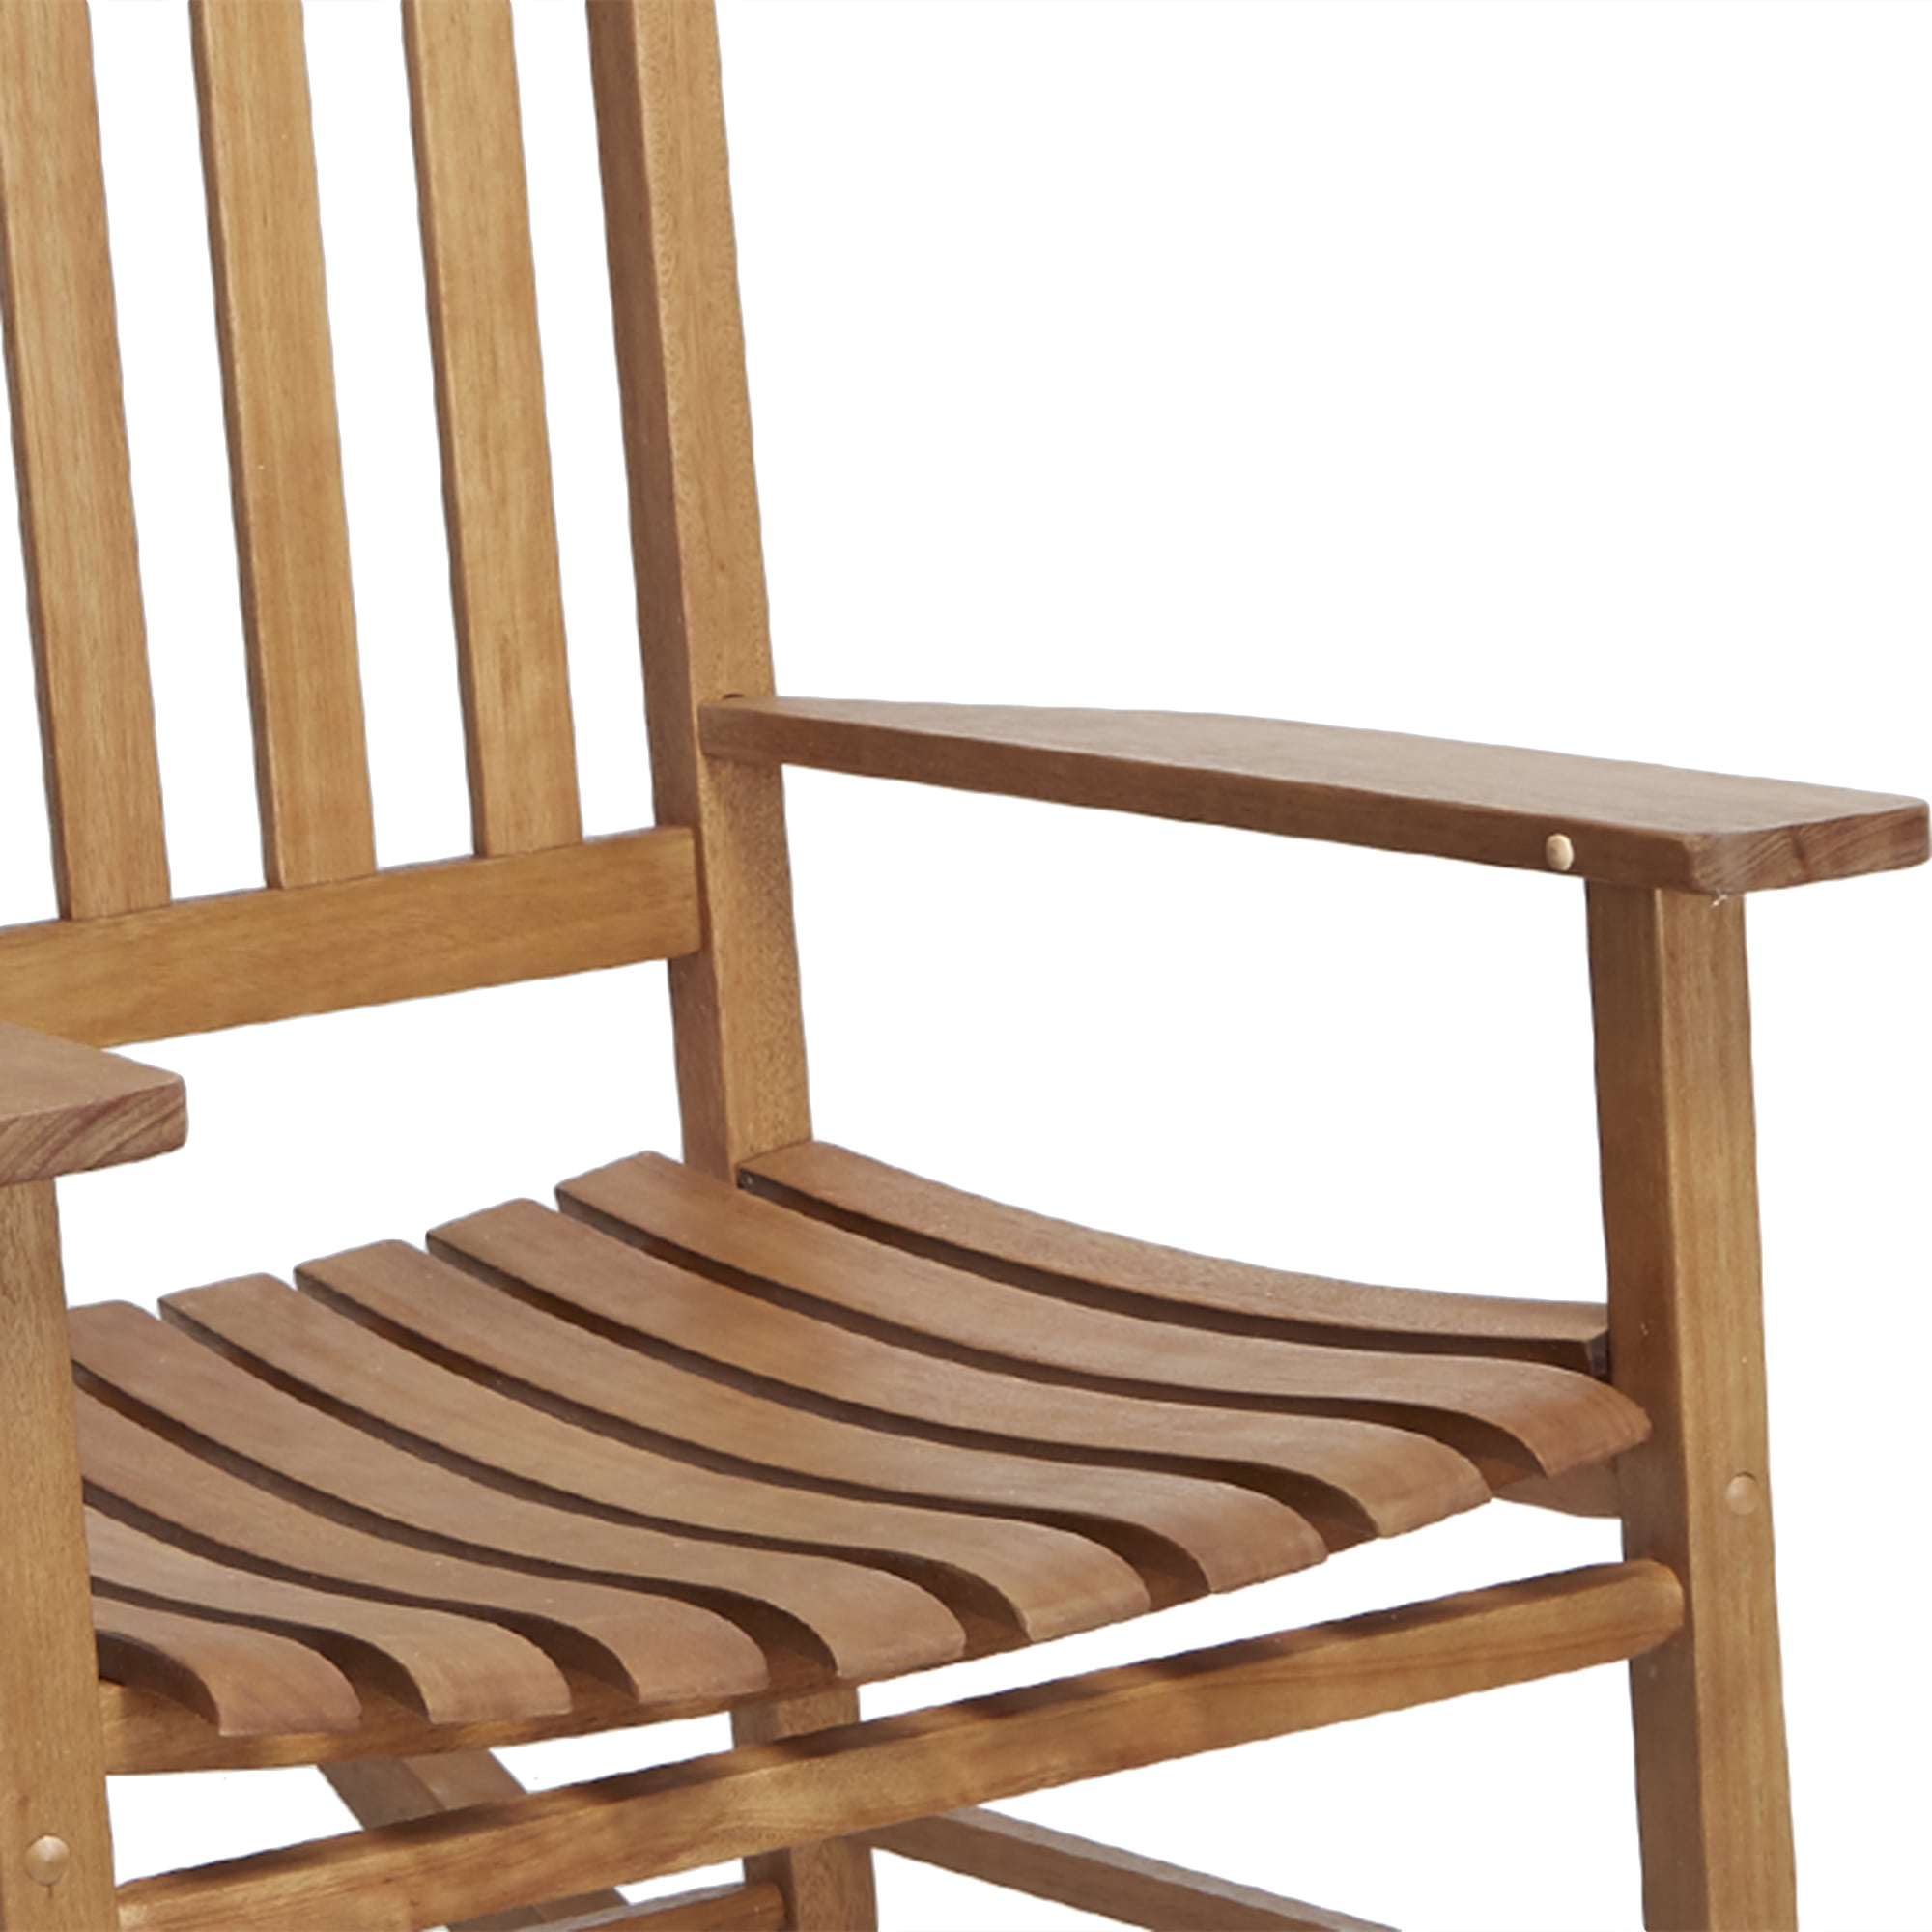 Mainstays Outdoor Natural Wood Slat Rocking Chair Indoor Patio Porch